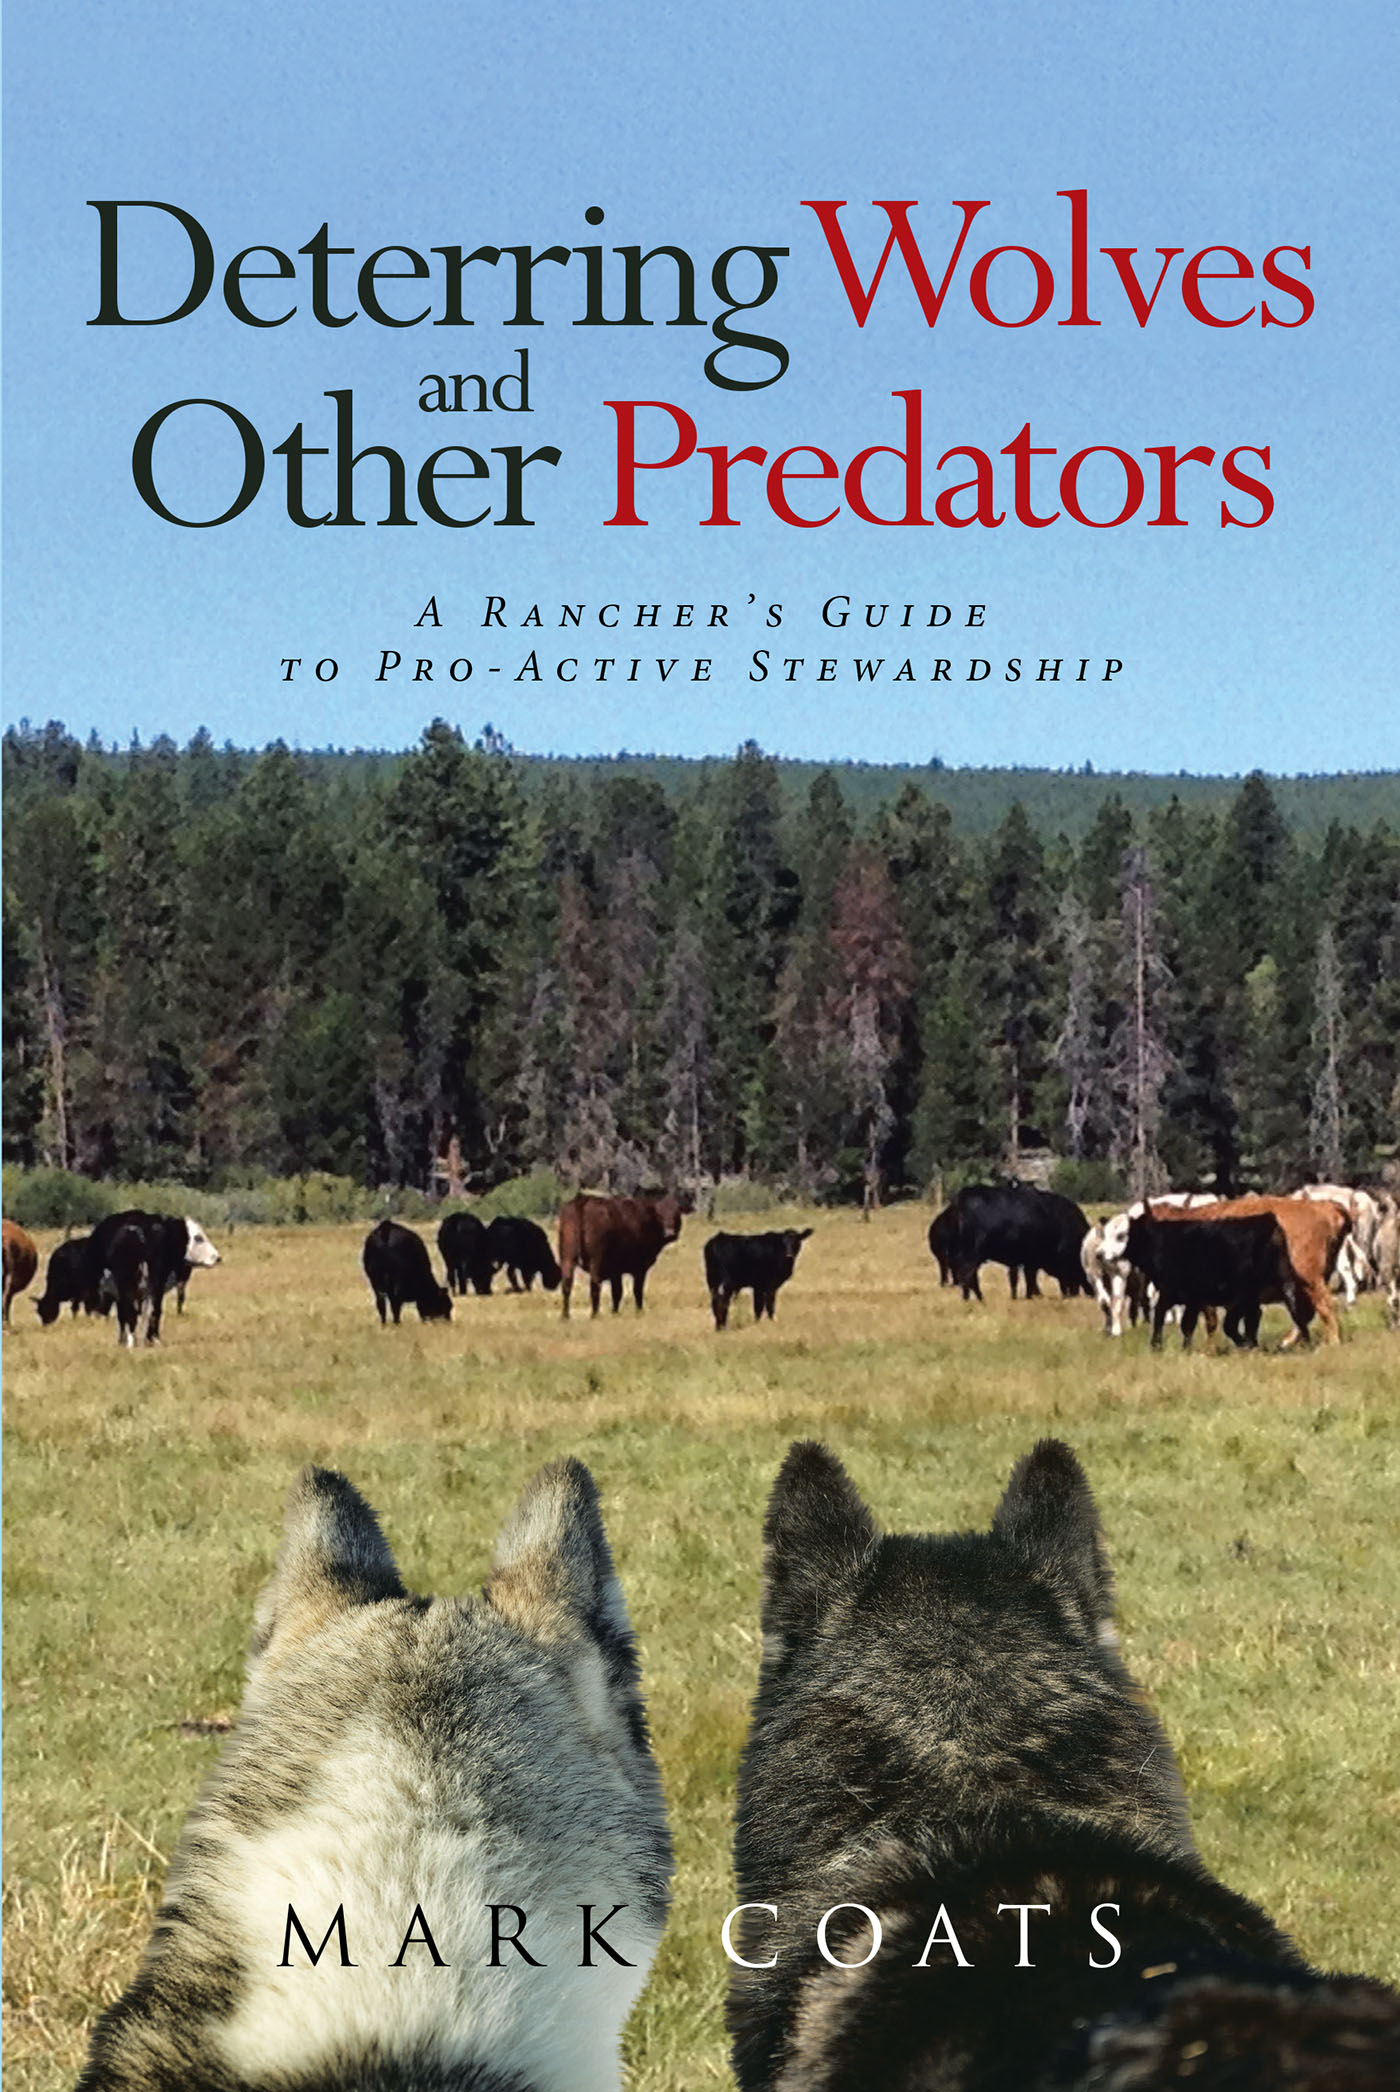 Author Mark Coats’s New Book, "Deterring Wolves and Other Predators," Helps Readers Become Aware of the Possibility of Predatory Pressures